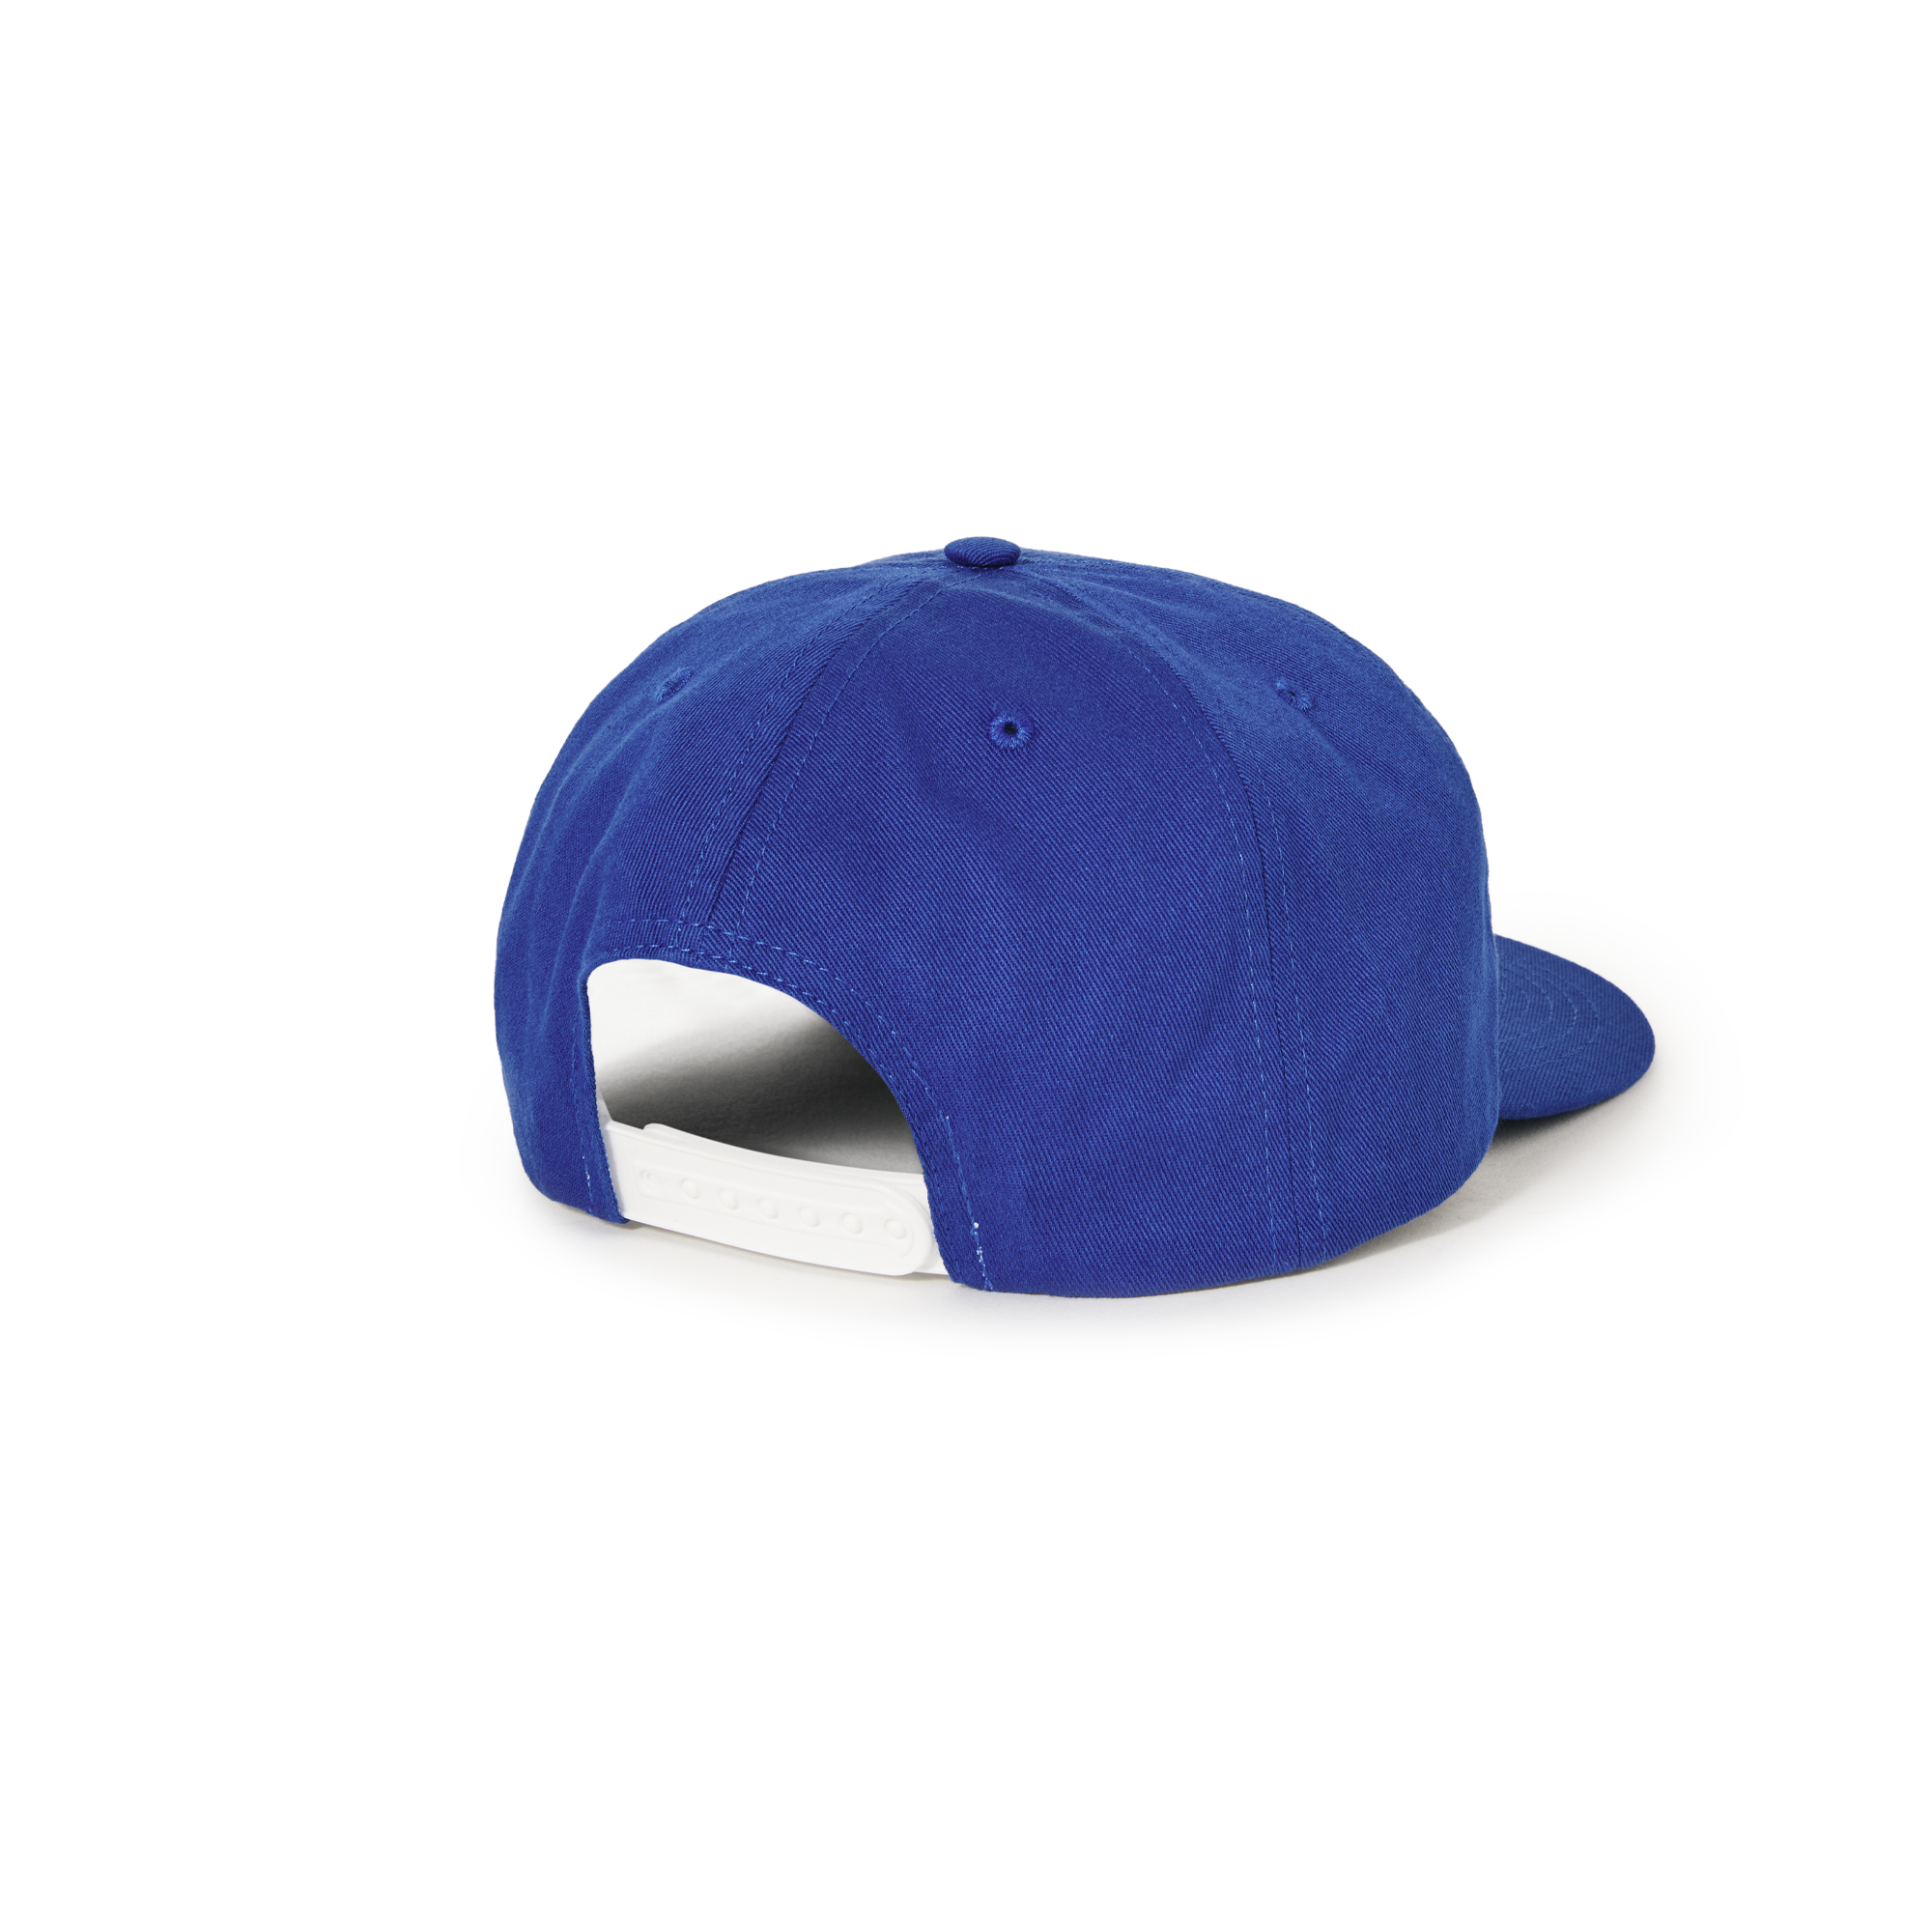 Deep blue polar six panel cap with white outline logo on front and white adjustable strap on back. Free uk shipping on orders over £50